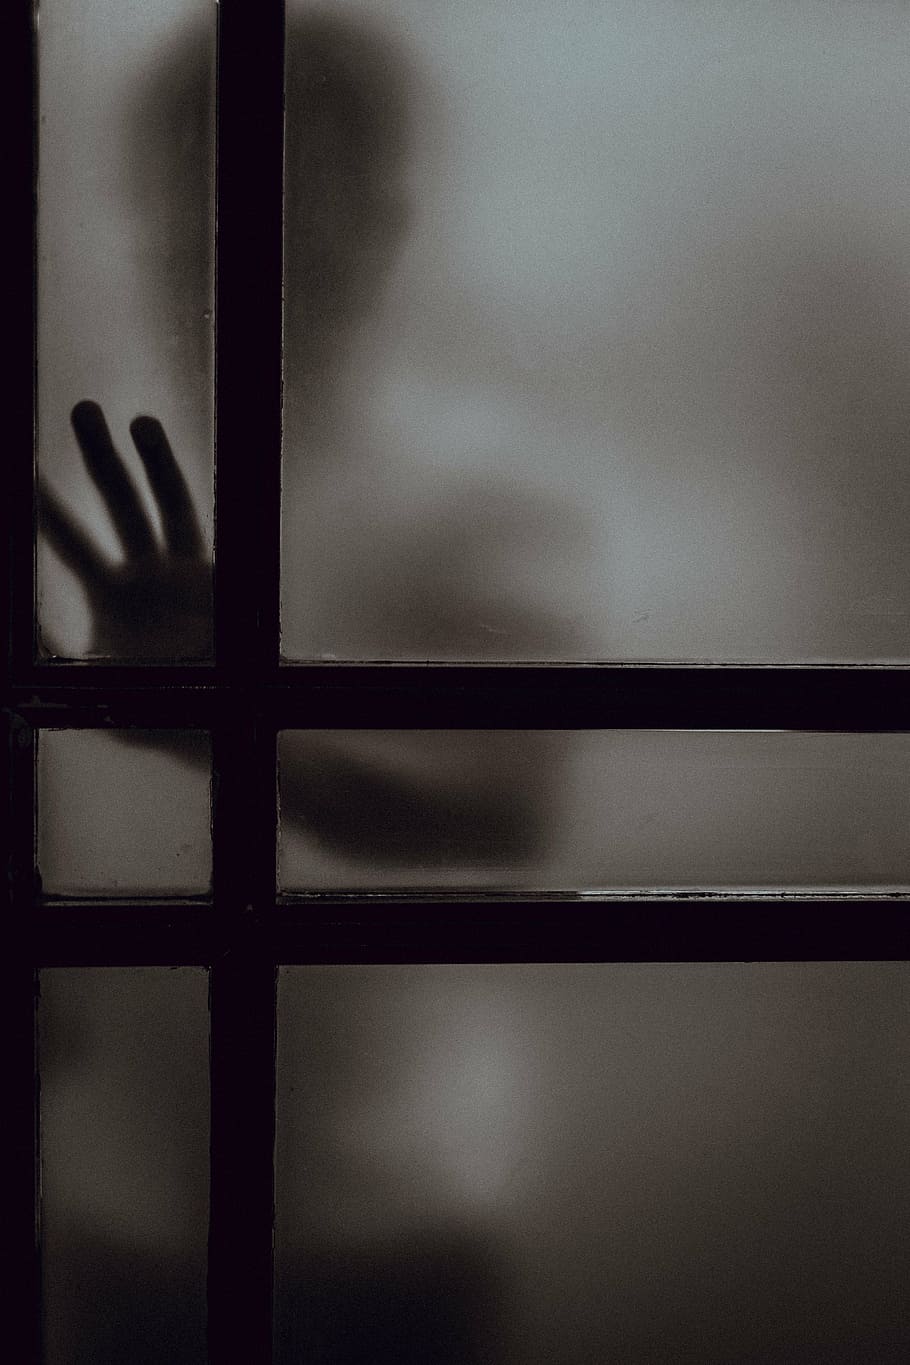 person, placing, hand, frosted, door panel, dark, glass, window, shadow, silhouette